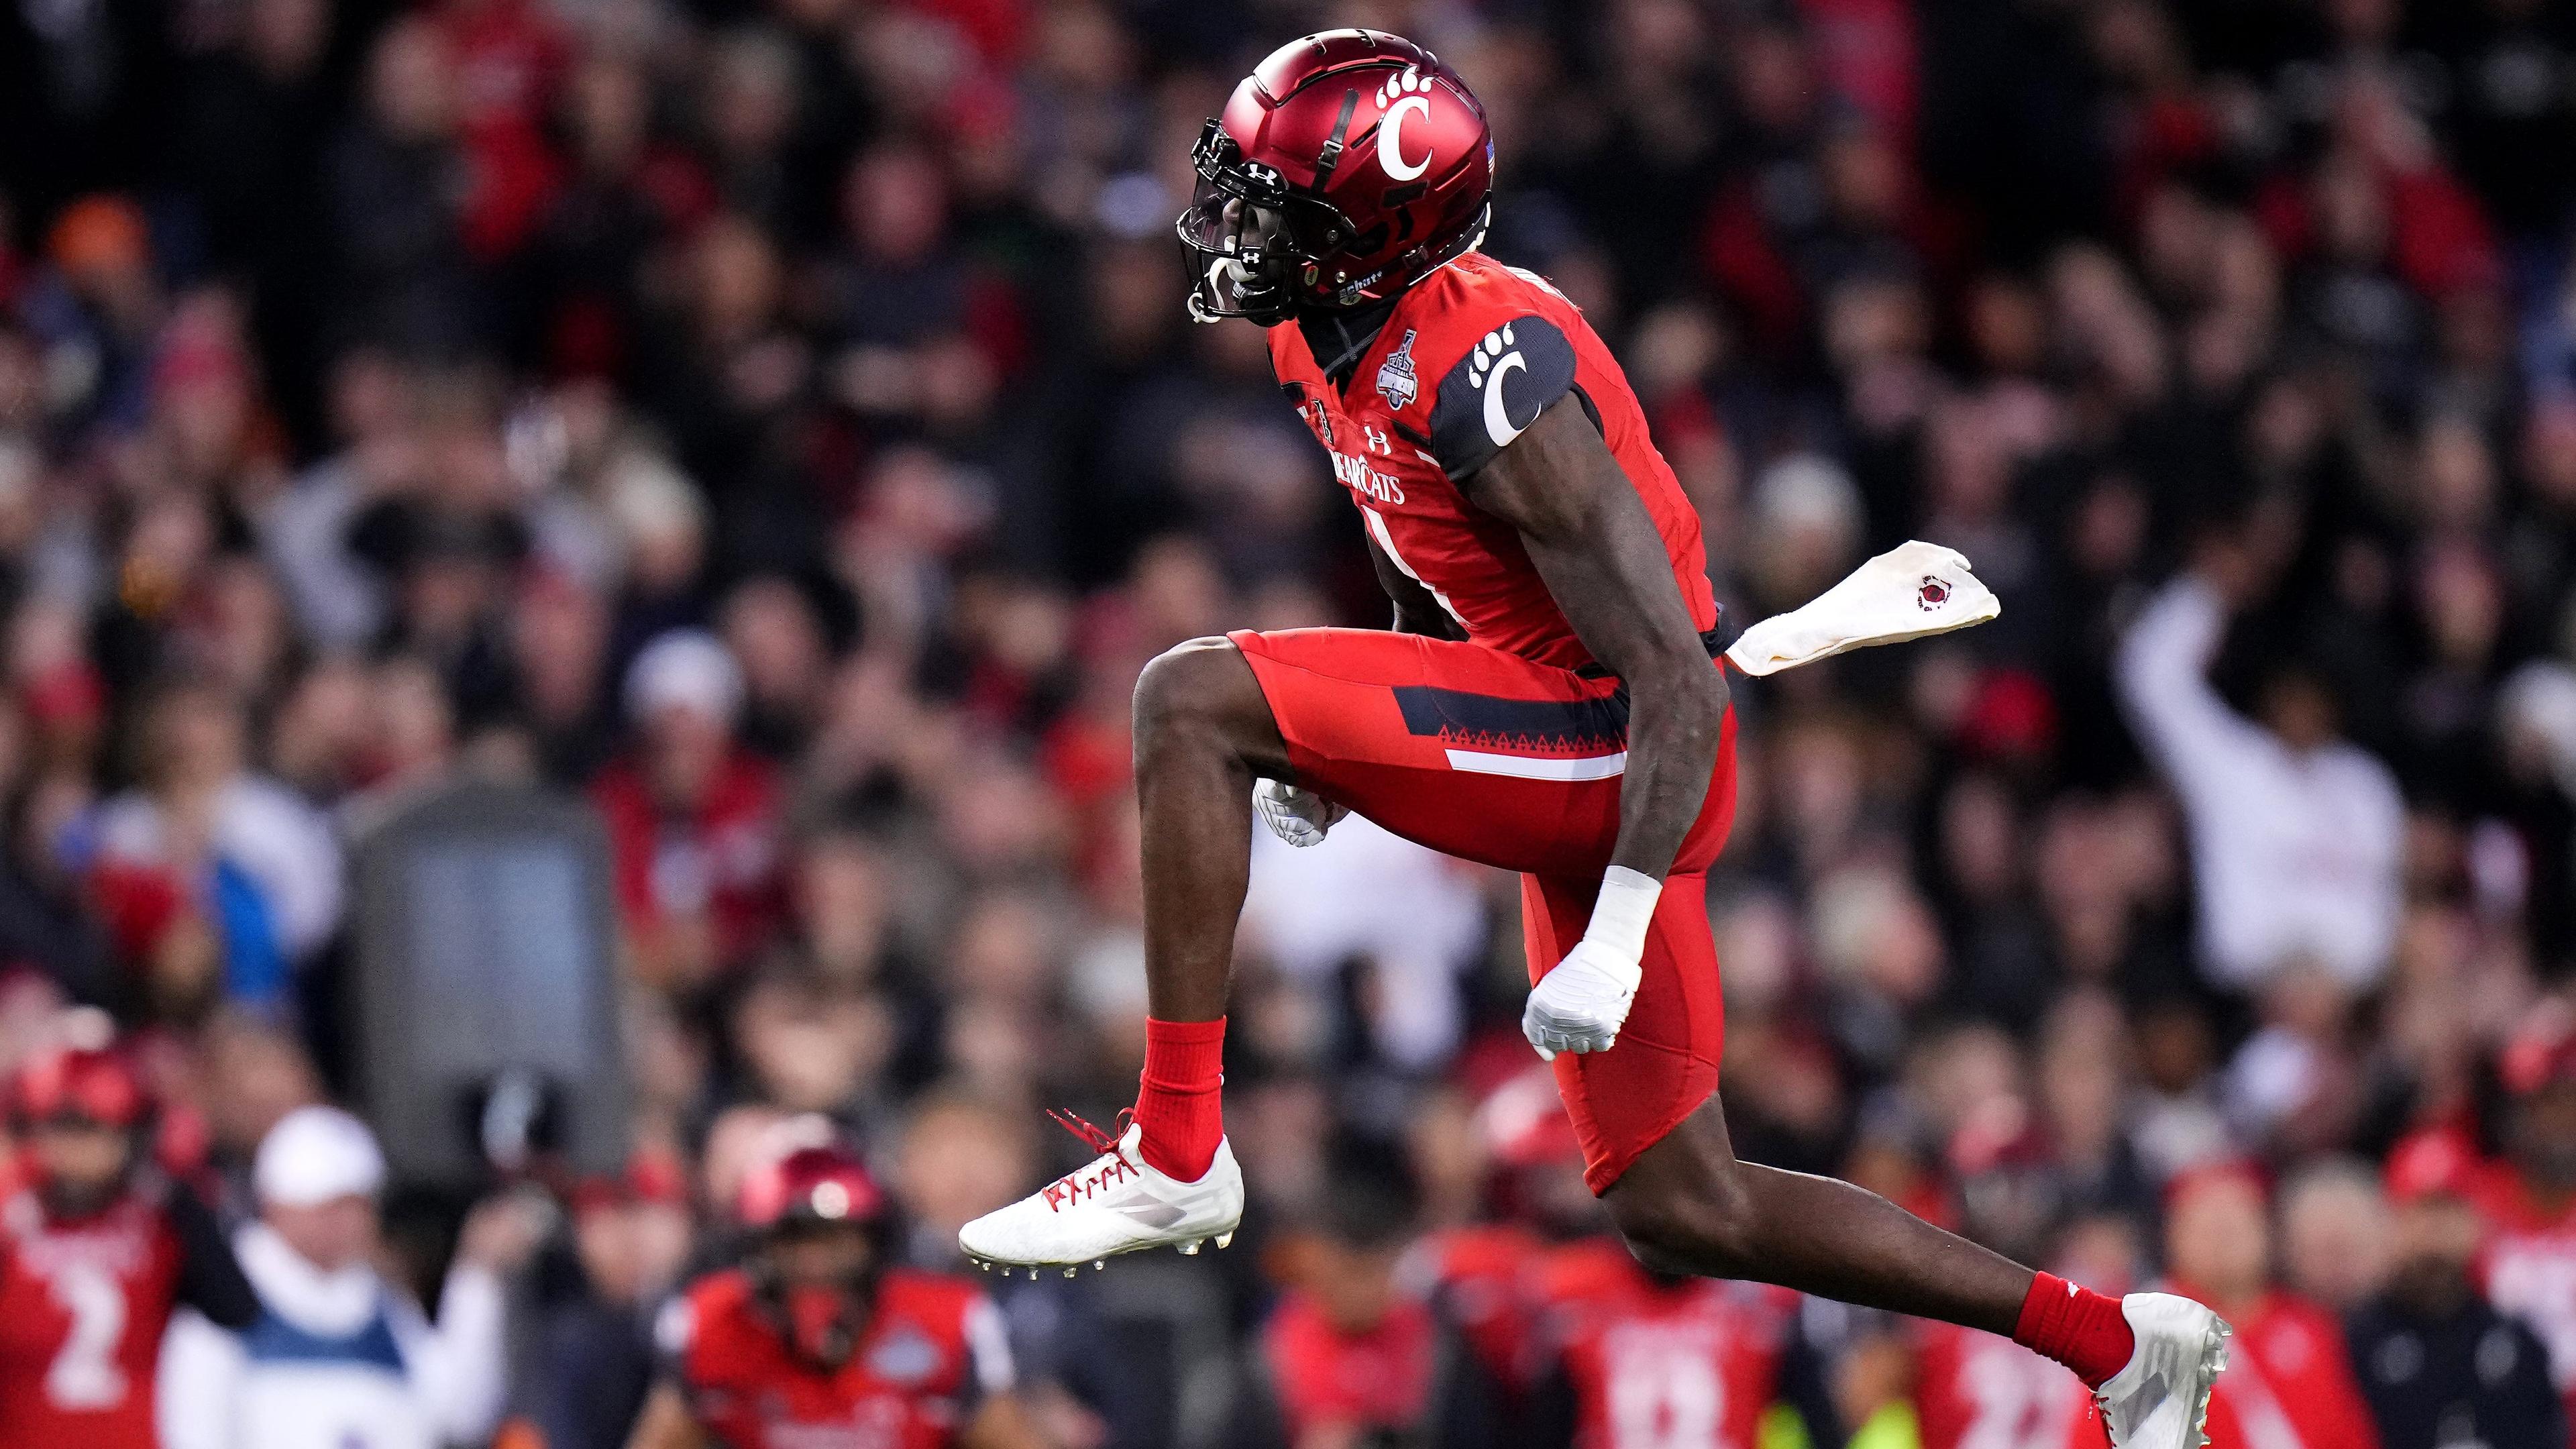 Cincinnati Bearcats cornerback Ahmad Gardner (1) celebrates a sack of Houston Cougars quarterback Clayton Tune (3) in the second quarter during the American Athletic Conference championship. / Kareem Elgazzar/The Enquirer-USA TODAY NETWORK